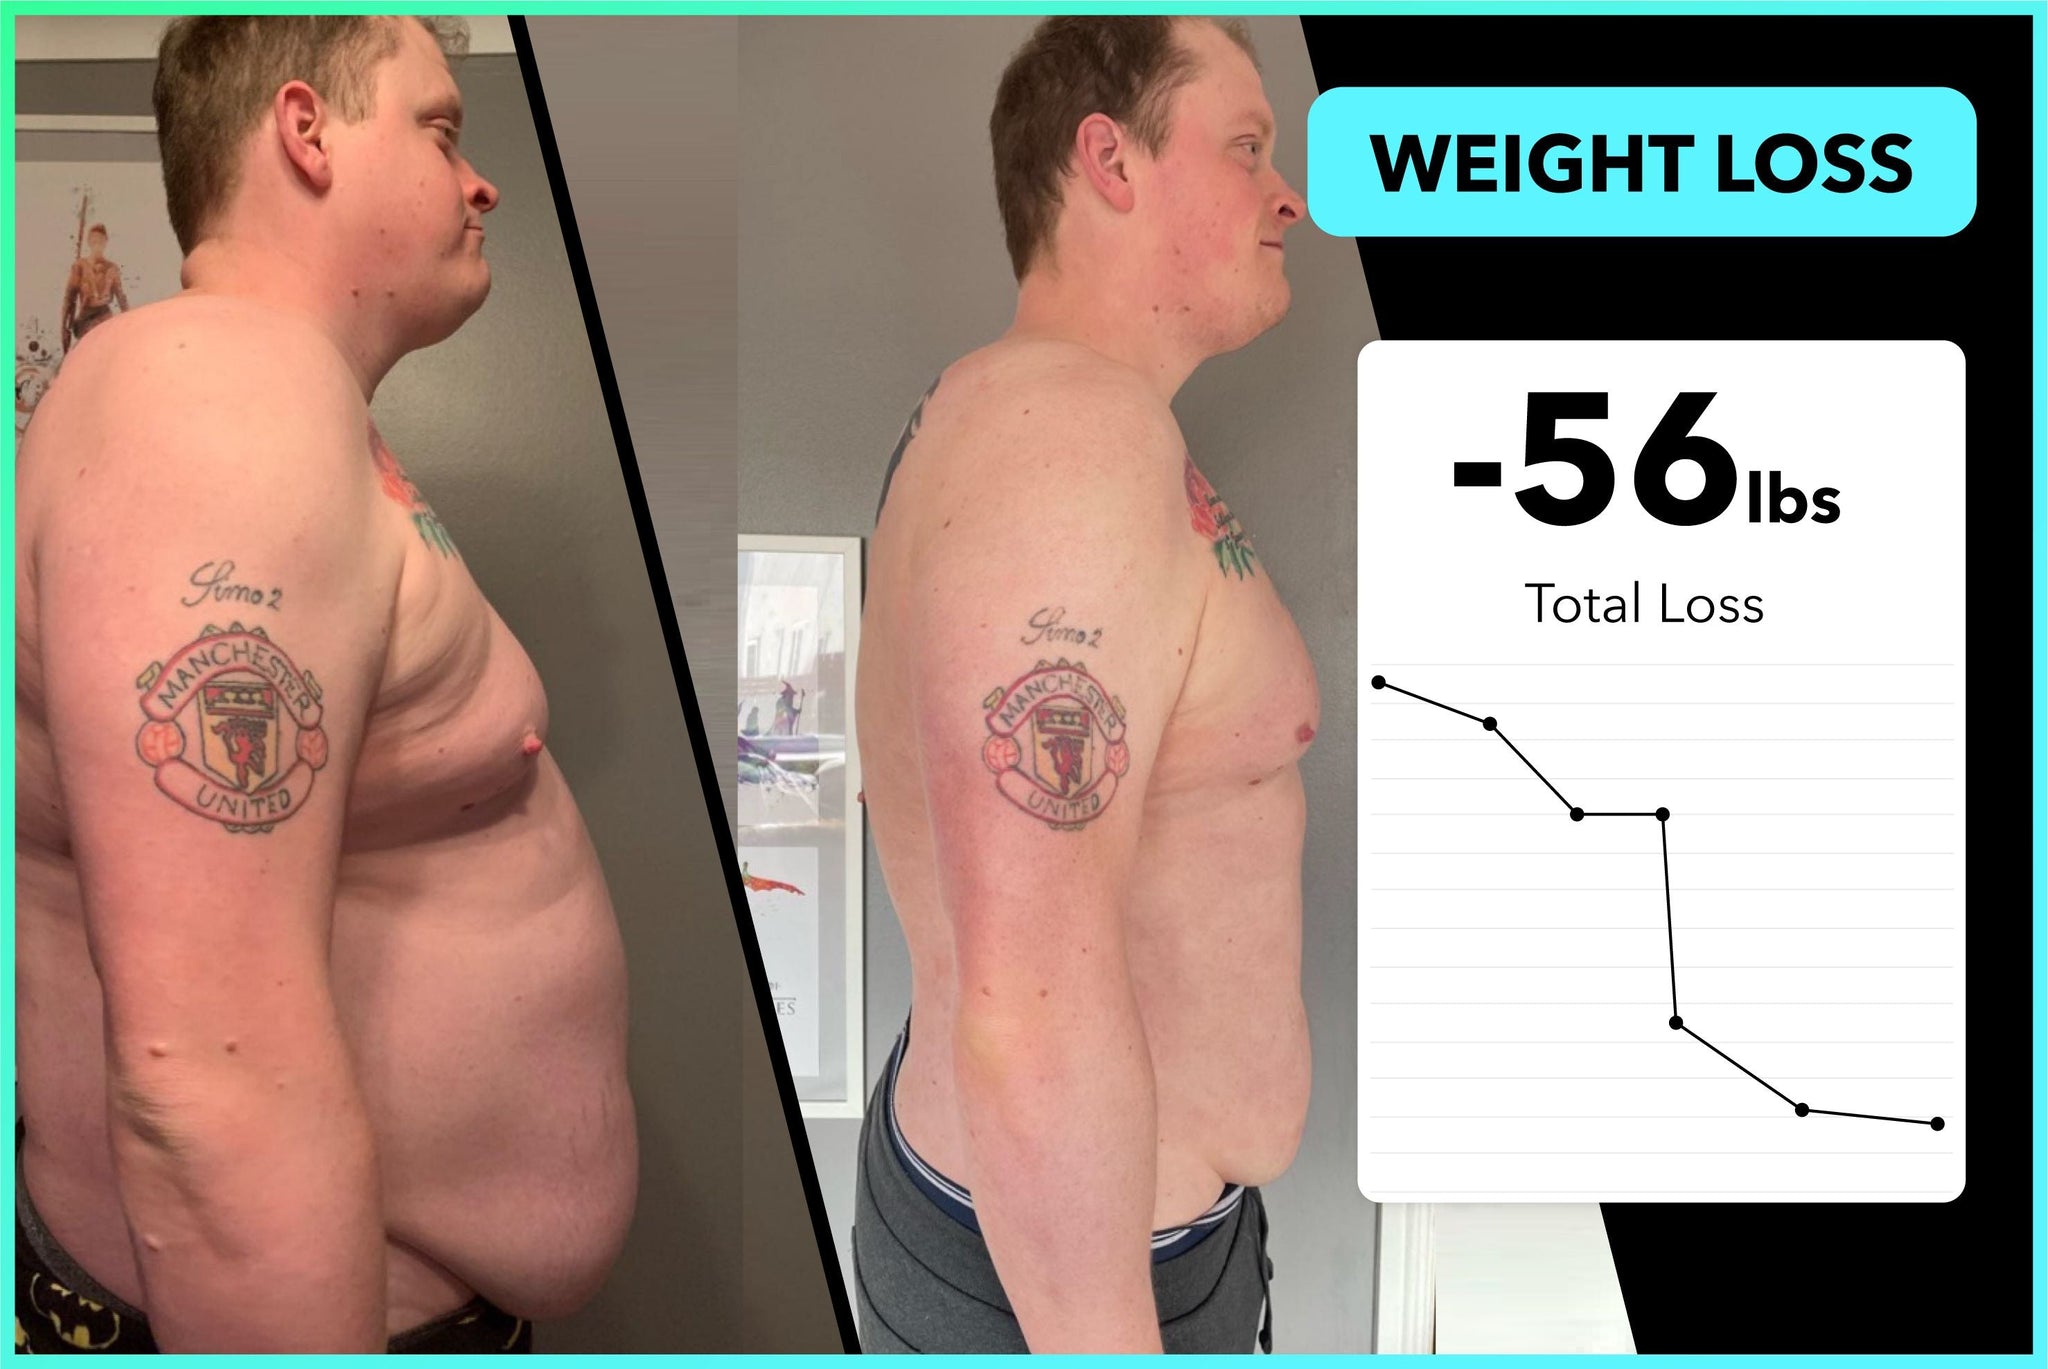 Michael lost 56lbs with Team RH!